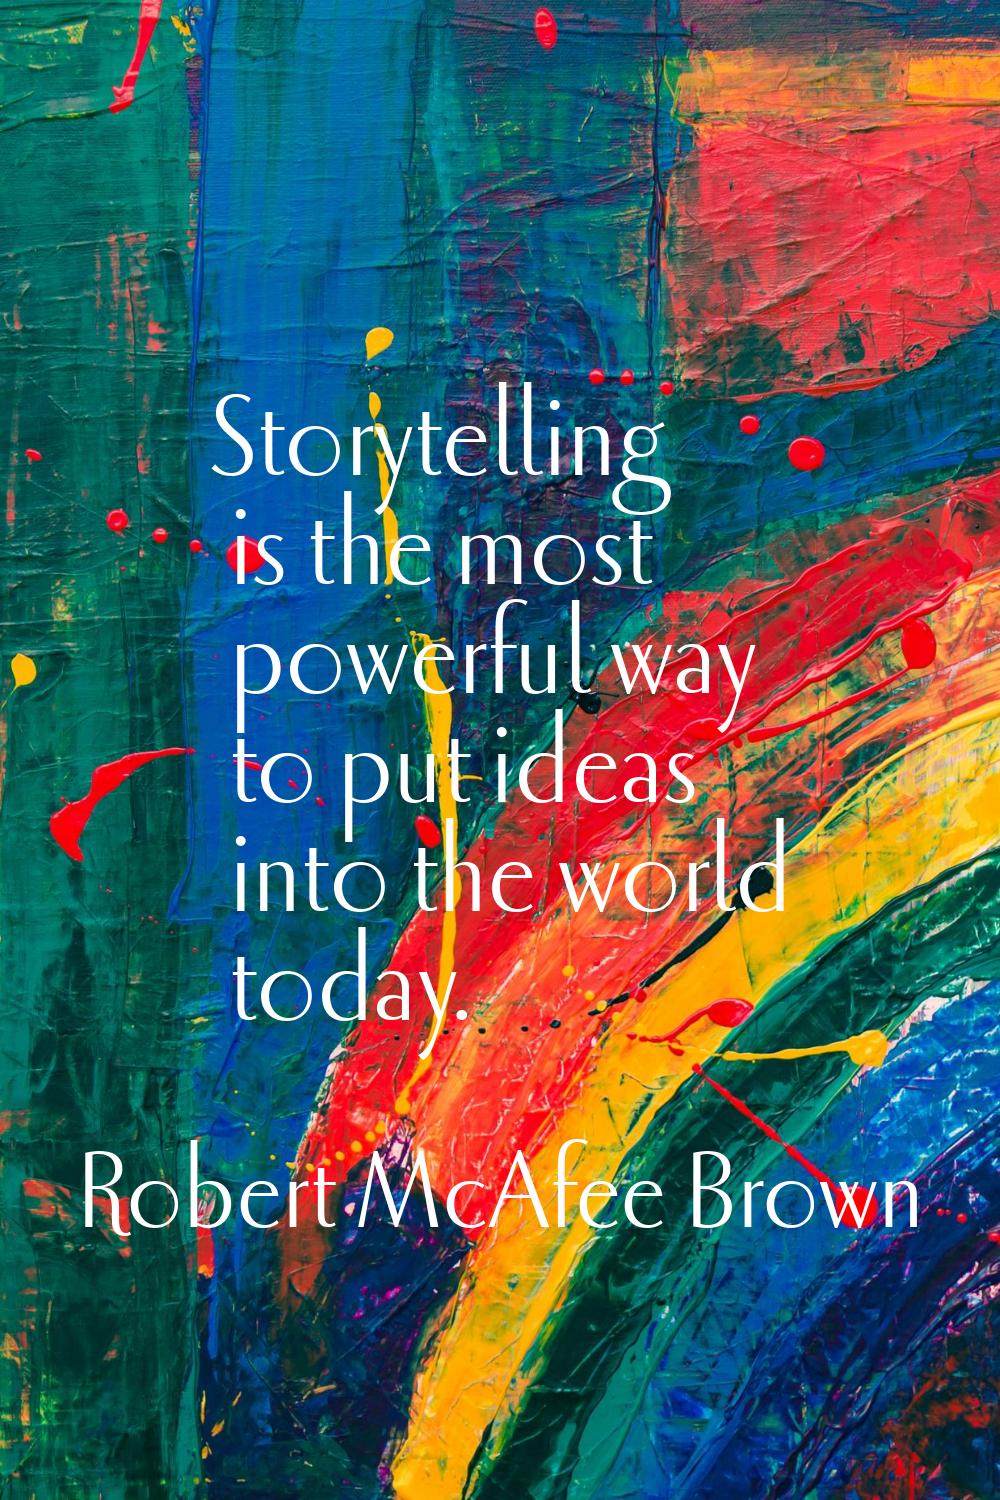 Storytelling is the most powerful way to put ideas into the world today.